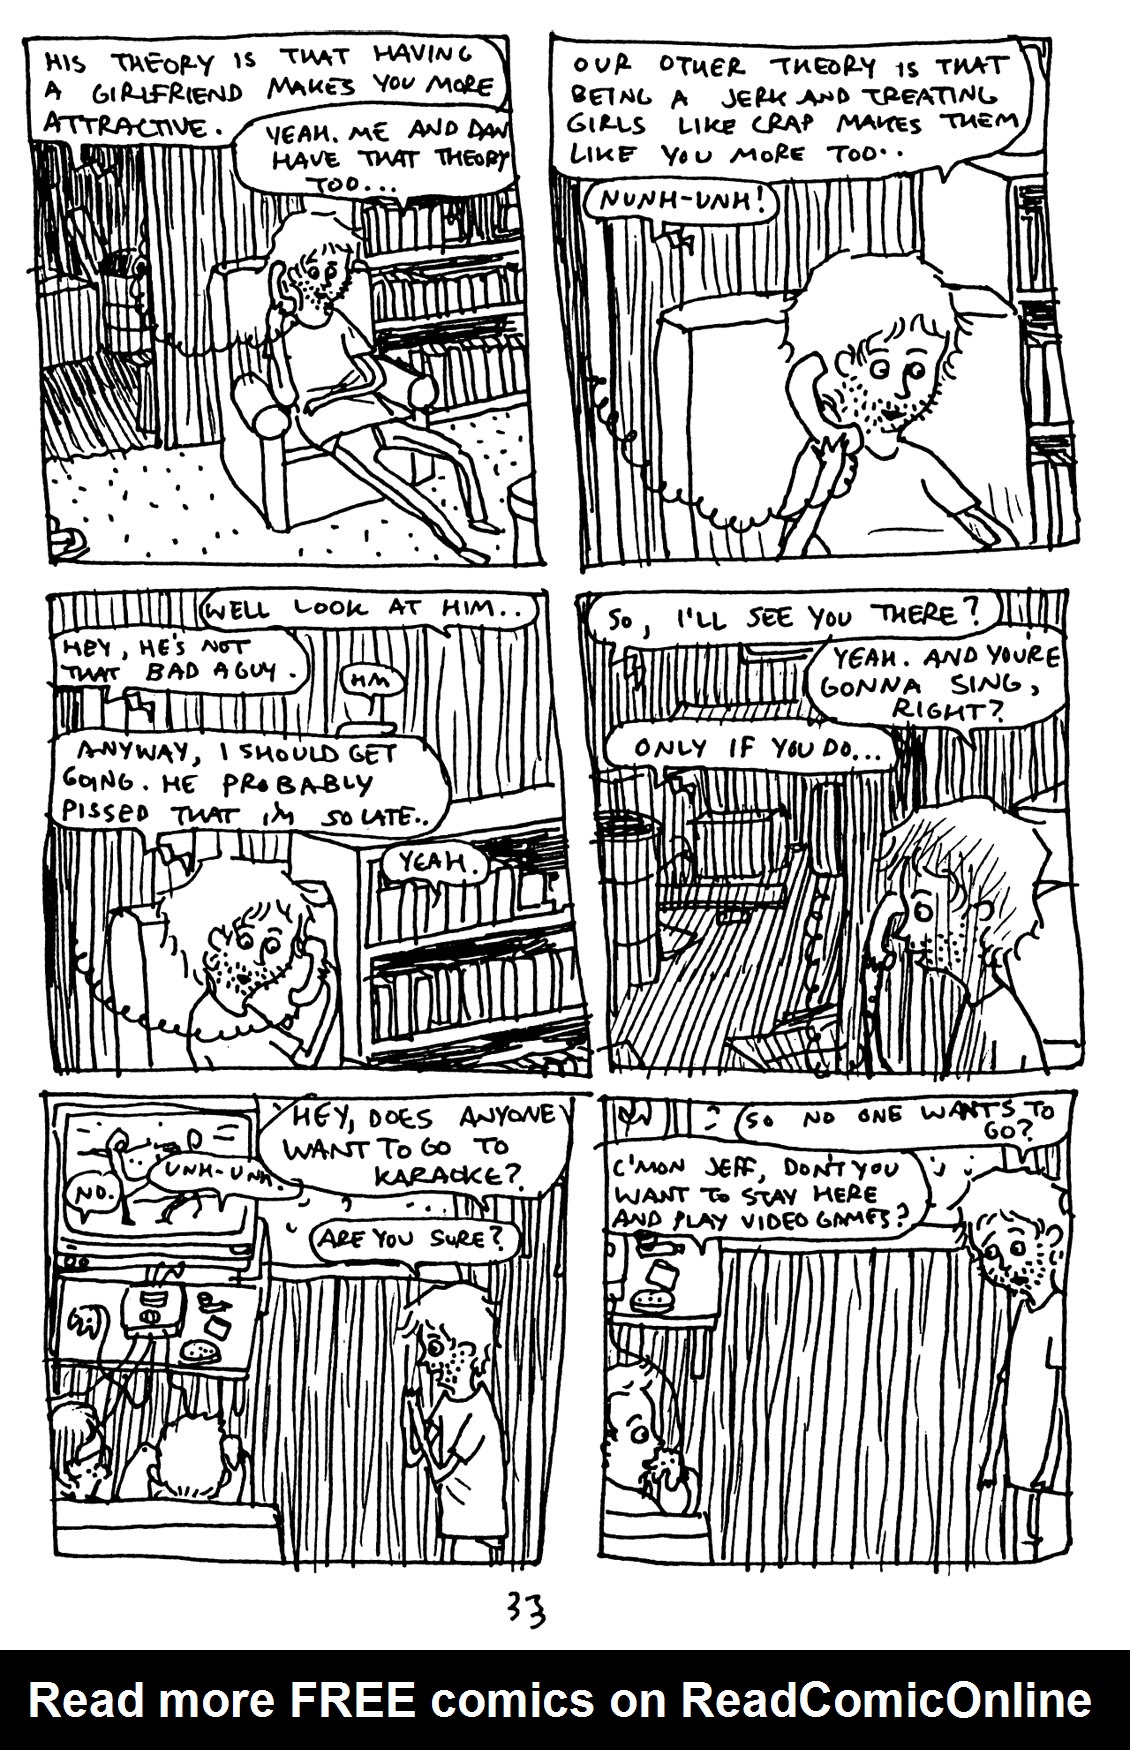 Read online Unlikely comic -  Issue # TPB (Part 1) - 43